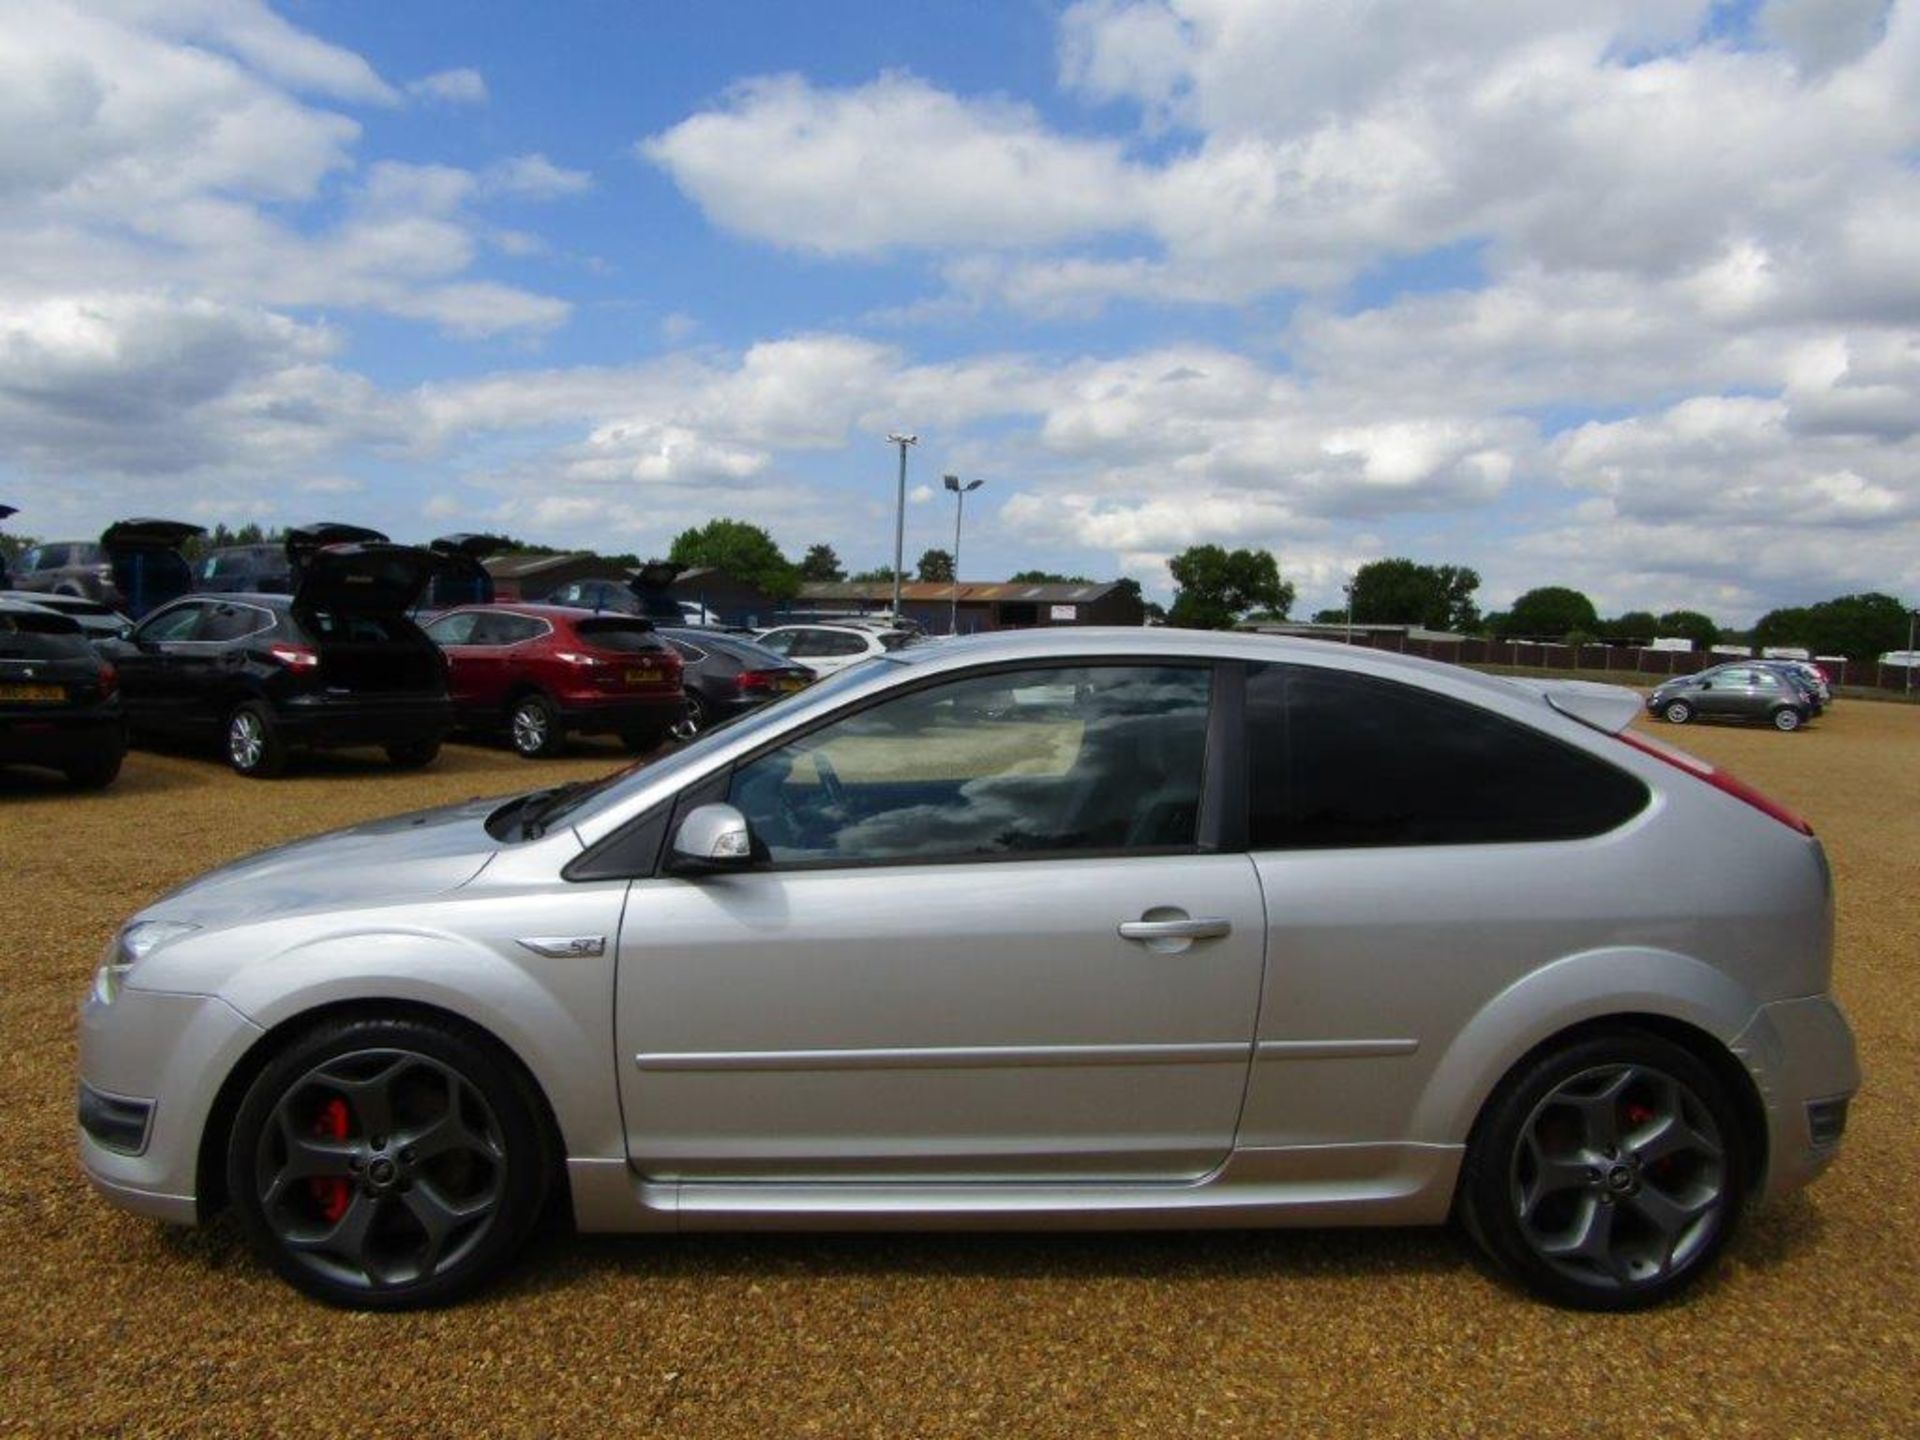 55 06 Ford Focus ST-2 - Image 20 of 20